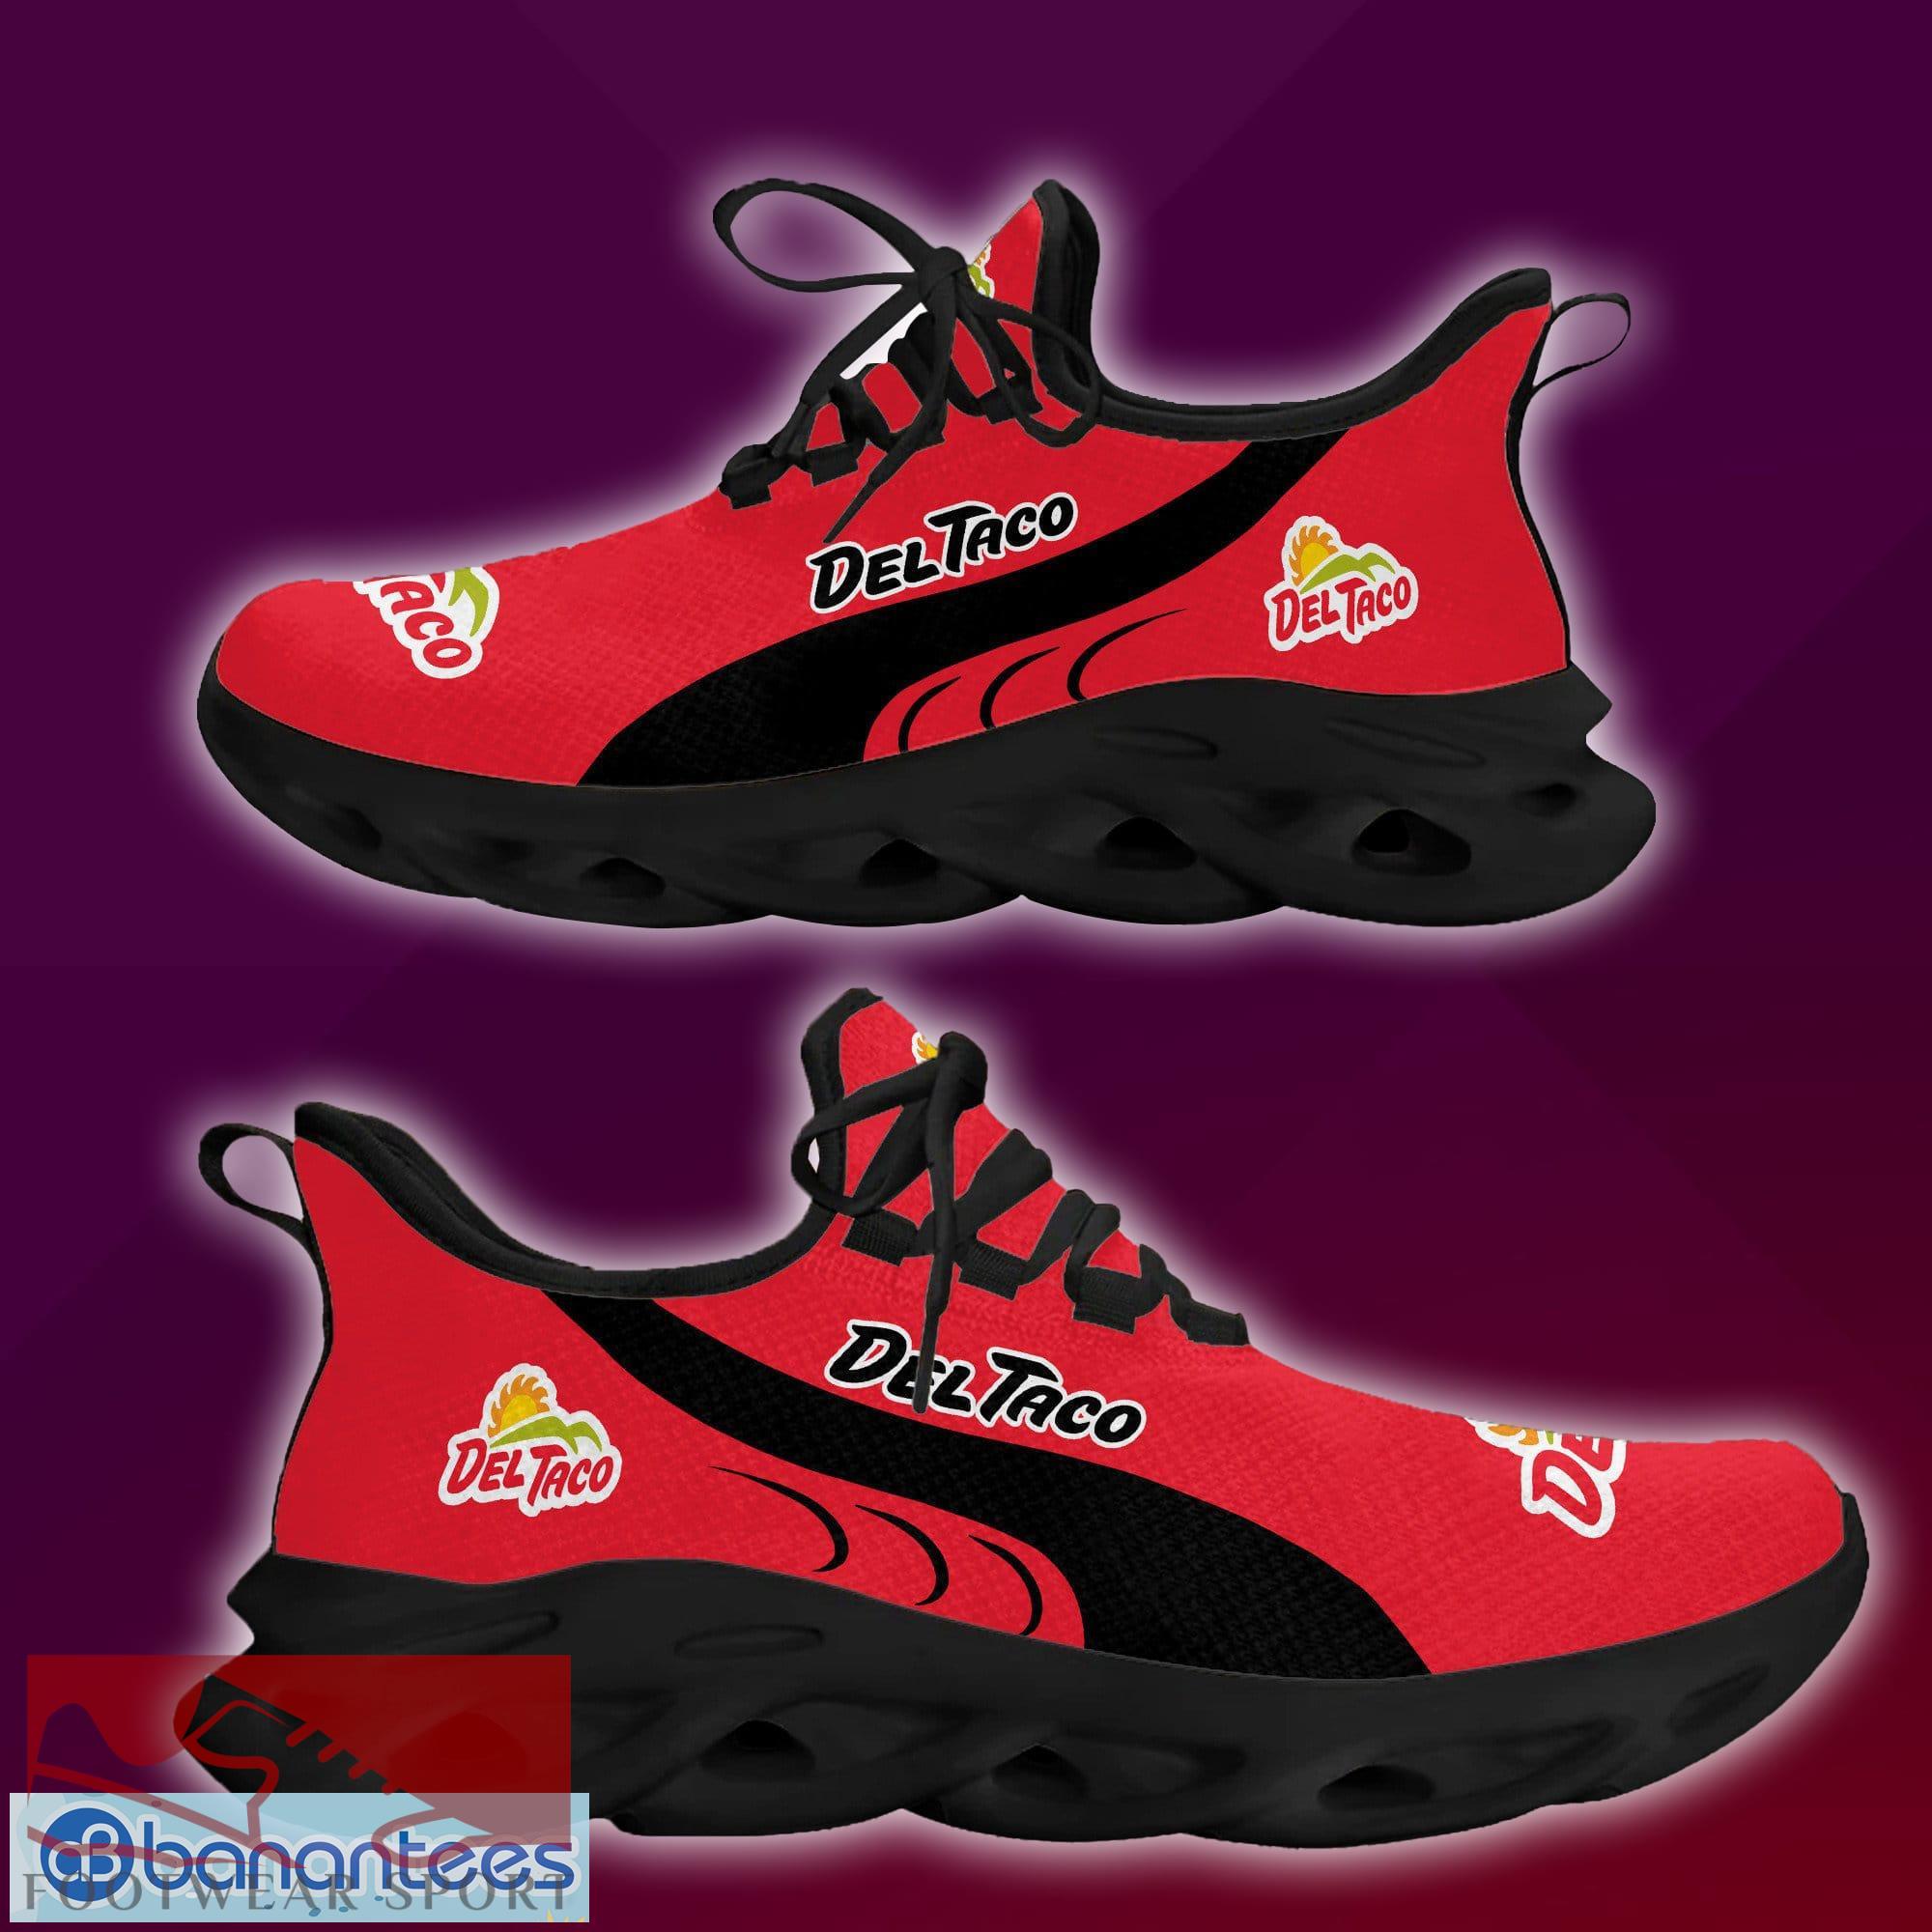 del taco Brand New Logo Max Soul Sneakers Monogram Sport Shoes Gift - del taco New Brand Chunky Shoes Style Max Soul Sneakers Photo 1